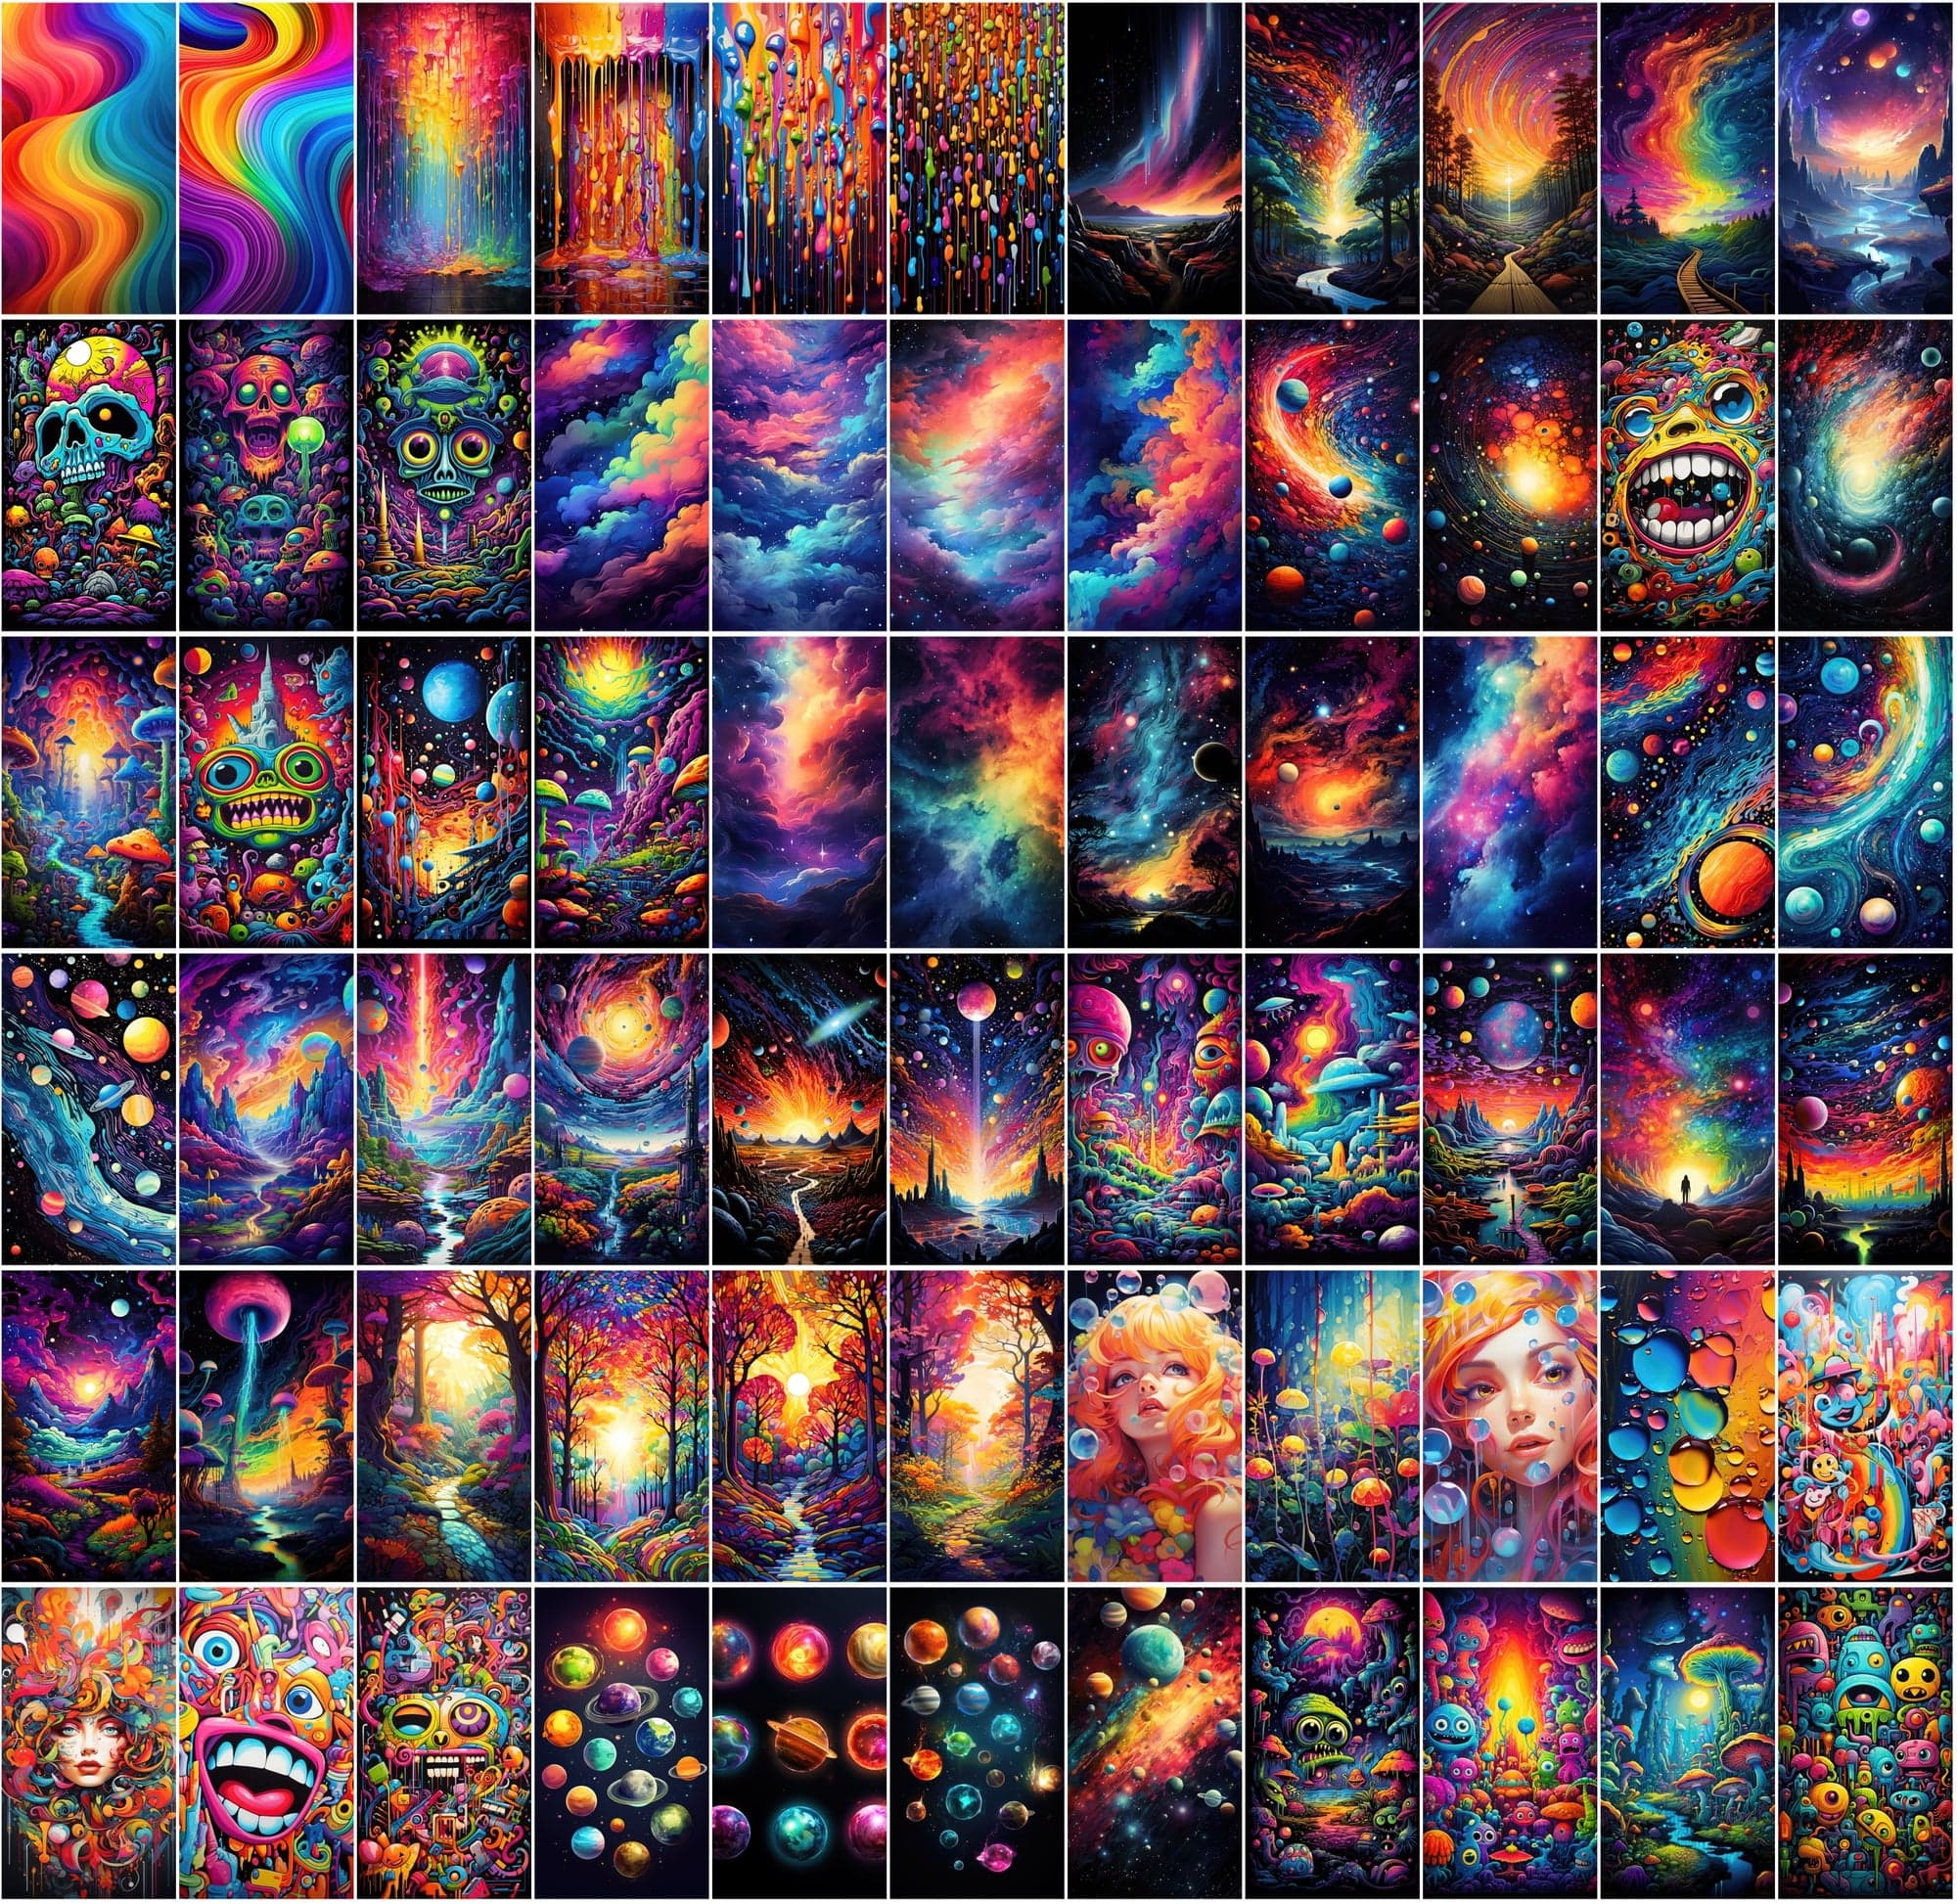 860+ Colorful PNG Poster Images: Astral, Celestial, Blossoms, Alien Worlds, Space Exploration, and More - High Resolution, Commercial License Included Digital Download Sumobundle